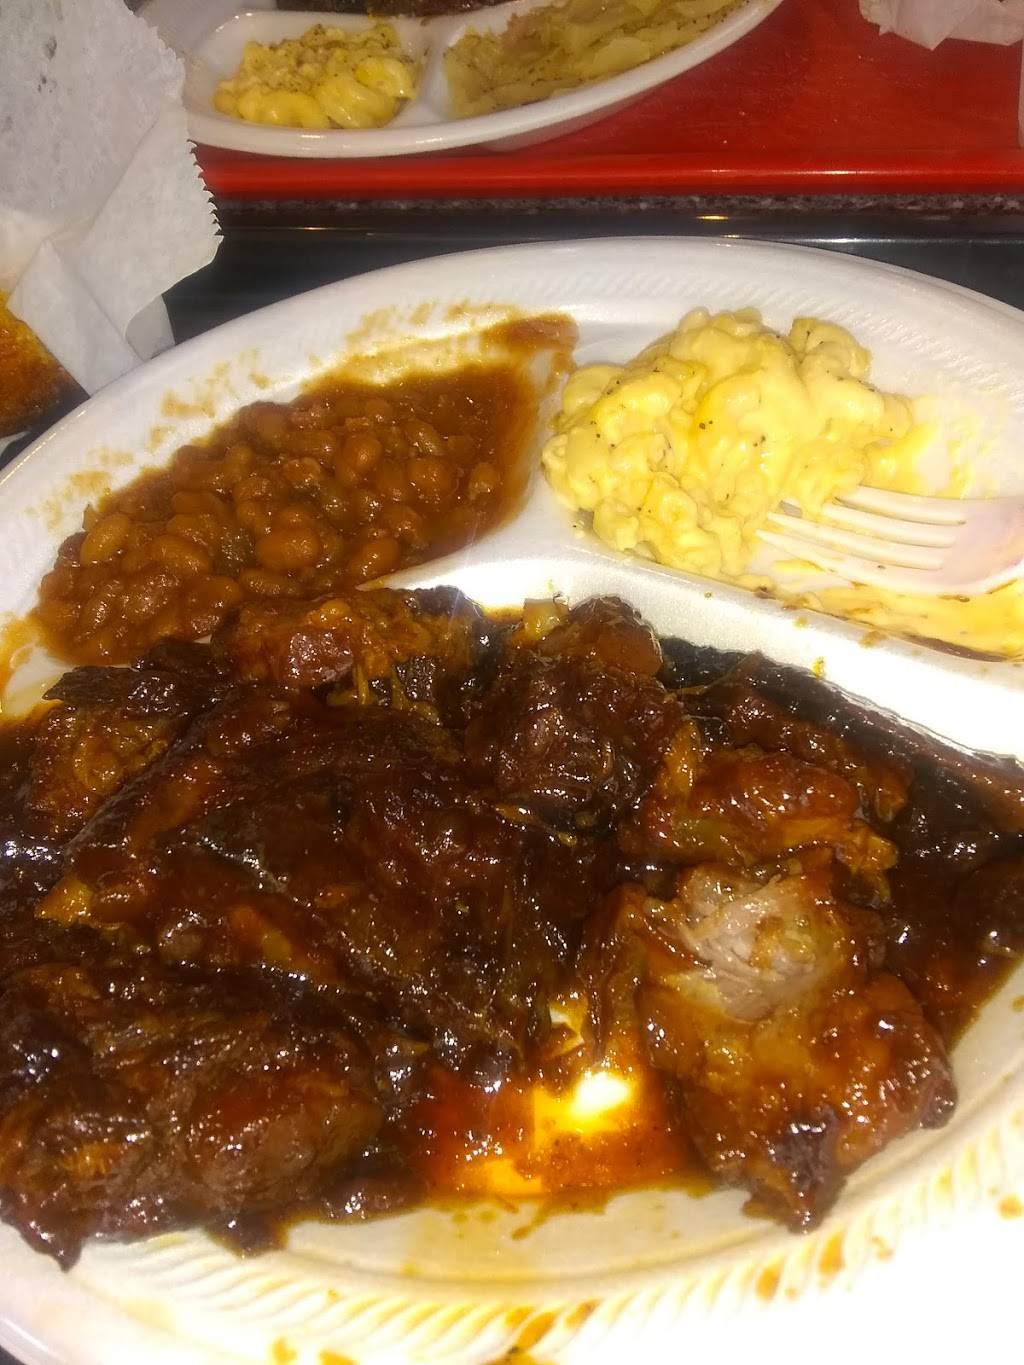 Adeles Southern Cooking & BBQ | 2913 Dixie Hwy, Louisville, KY 40216 | Phone: (502) 398-5880